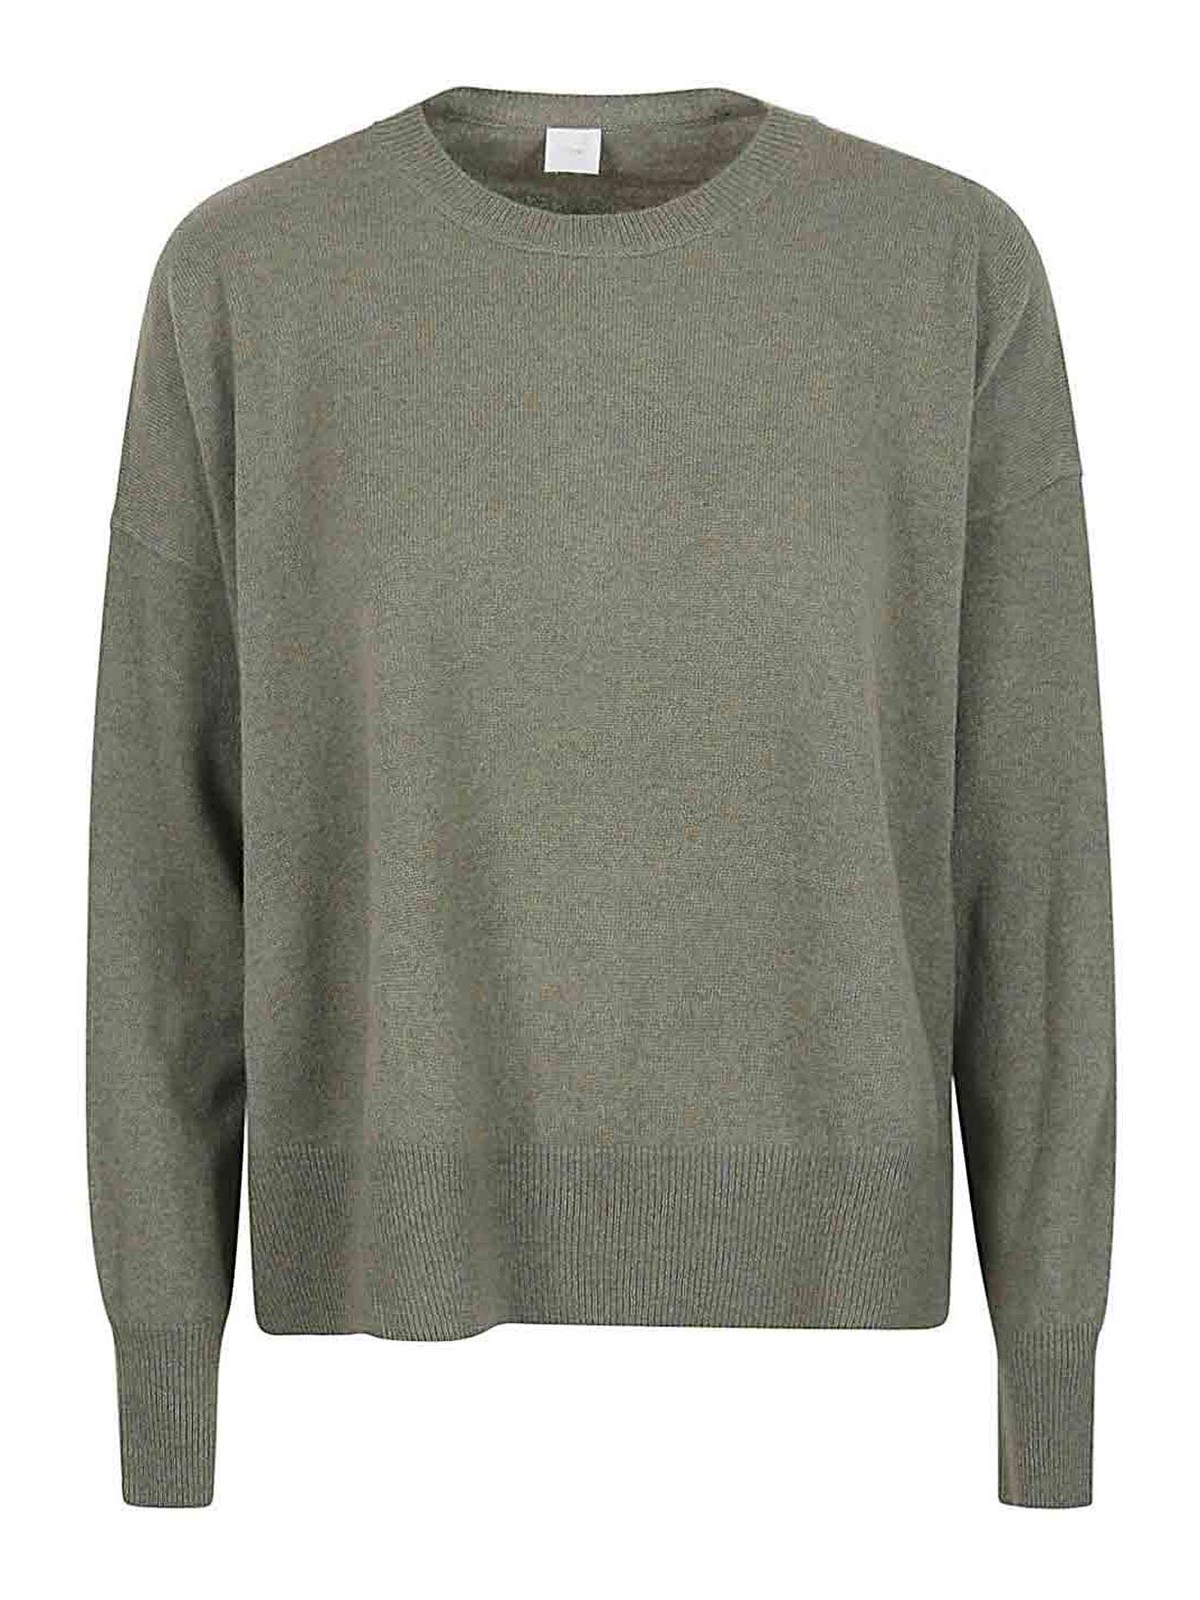 Ct Plage Cashmere Sweater In Light Brown